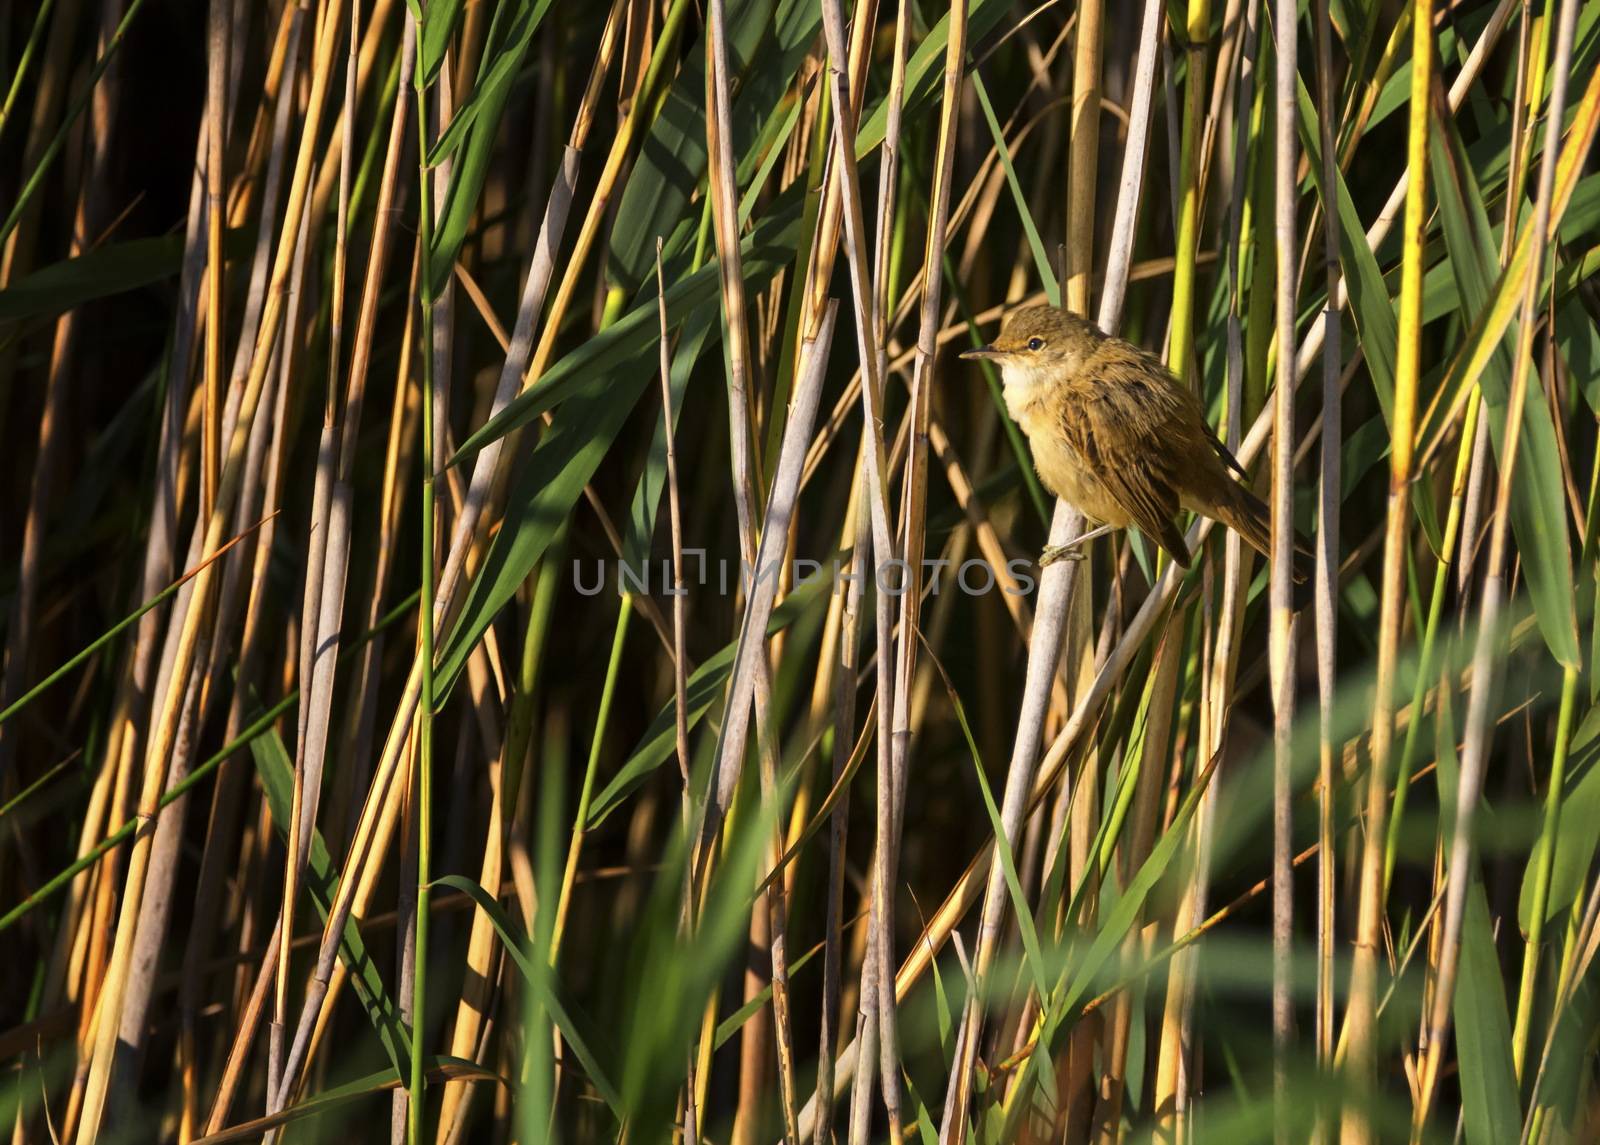 Eurasian reed warbler, acrocephalus scirpaceus, in the reed bed